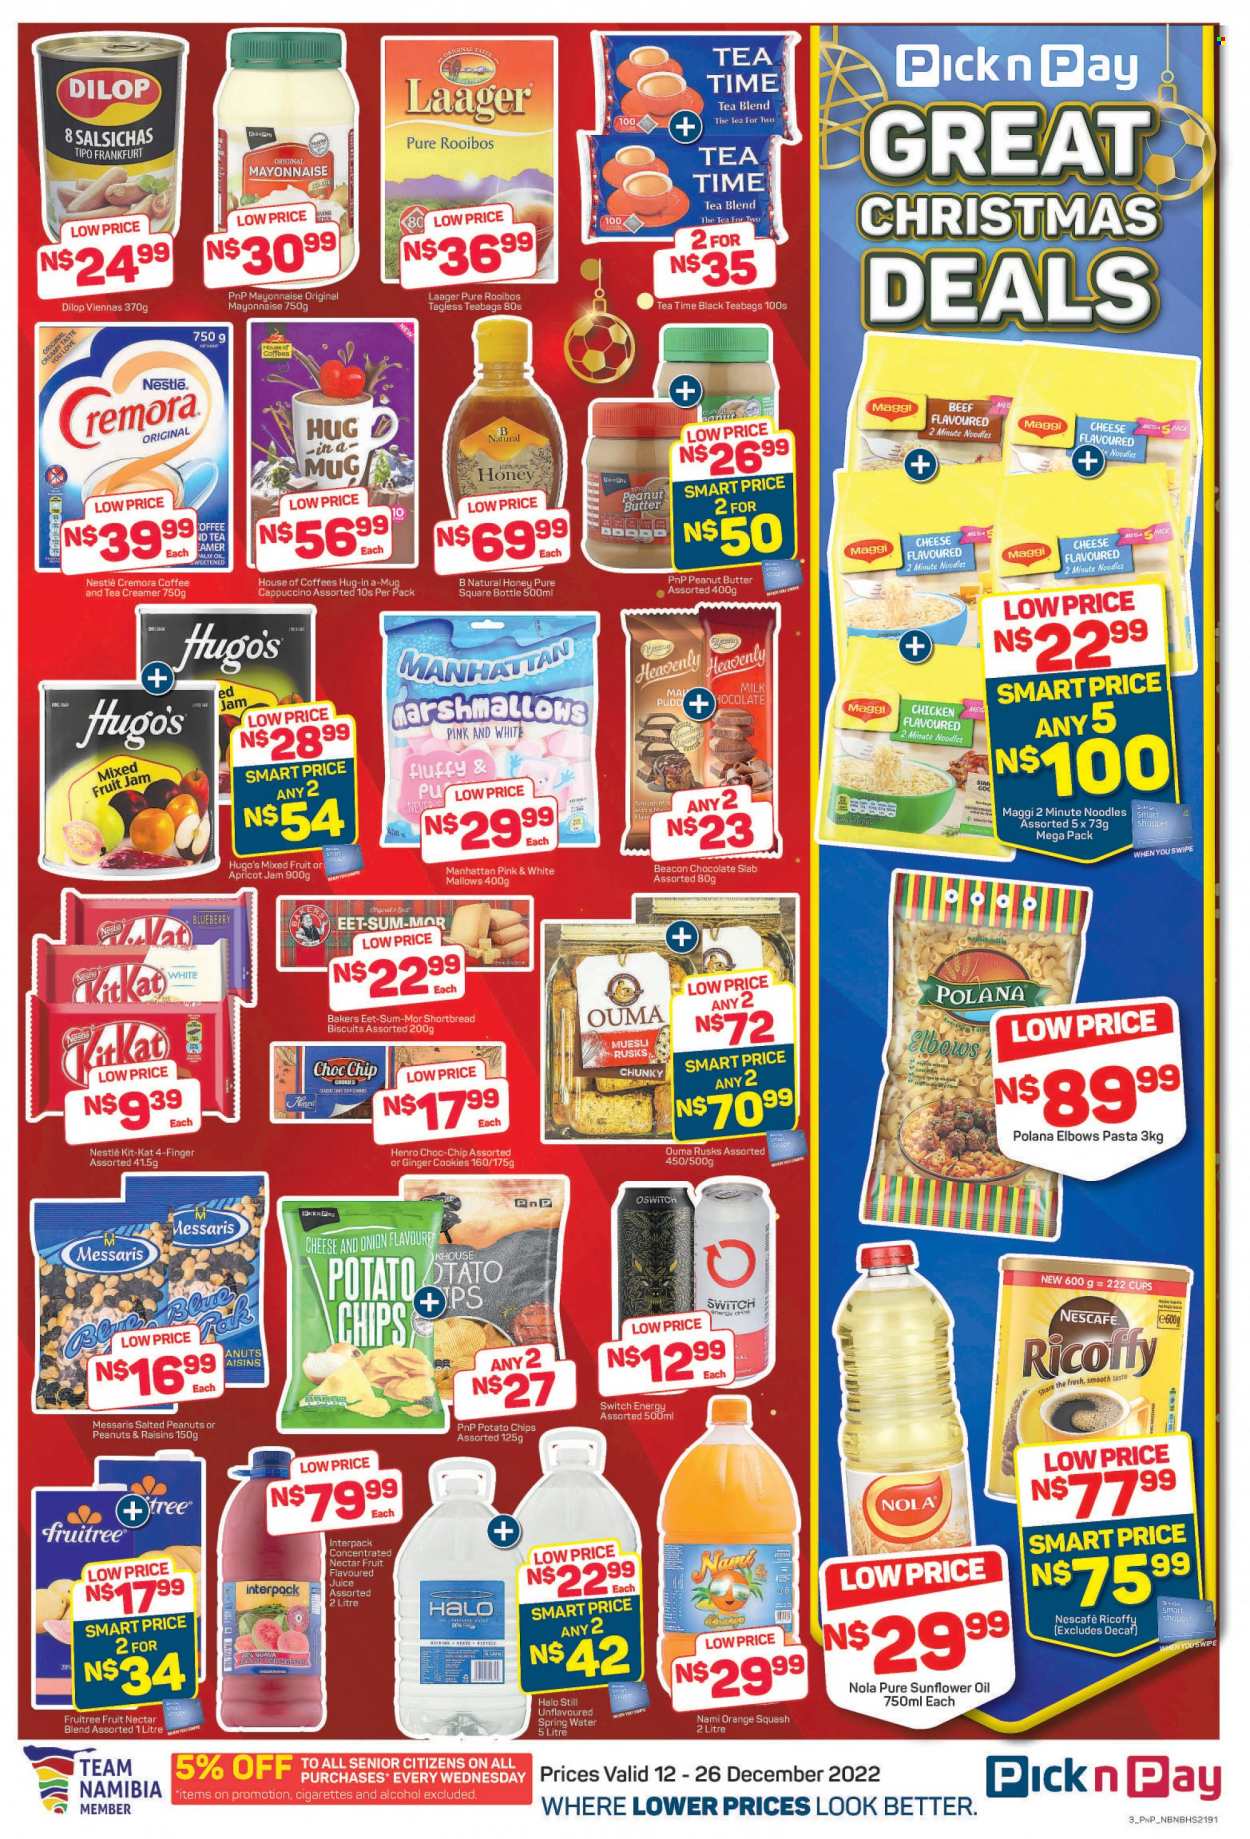 Pick n Pay catalogue  - 12/12/2022 - 26/12/2022 - Sales products - rusks, ginger, guava, pasta, noodles, vienna sausage, cheese, milk, creamer, coffee and tea creamer, mayonnaise, cookies, marshmallows, Nestlé, chocolate, KitKat, biscuit, potato chips, chips, Maggi, Cremora, muesli, sunflower oil, palm oil, oil, apricot jam, honey, jam, peanut butter, peanuts, dried fruit, switch, juice, fruit nectar, orange squash, spring water, tea, tea bags, rooibos tea, cappuccino, coffee, Ricoffy, Nescafé, alcohol, Bakers. Page 3.